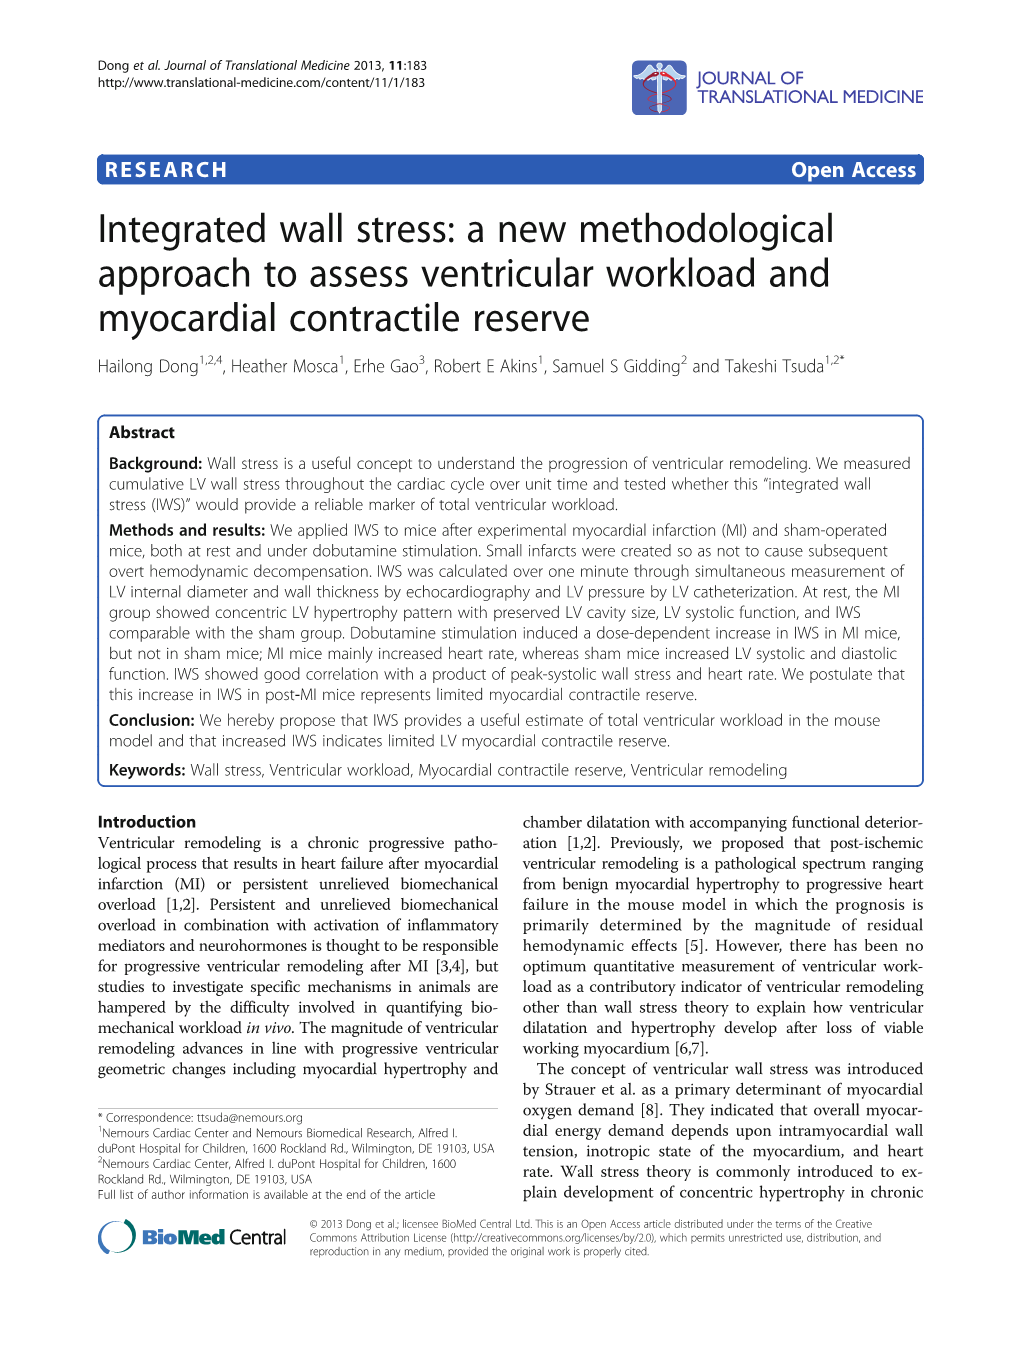 Integrated Wall Stress: a New Methodological Approach to Assess